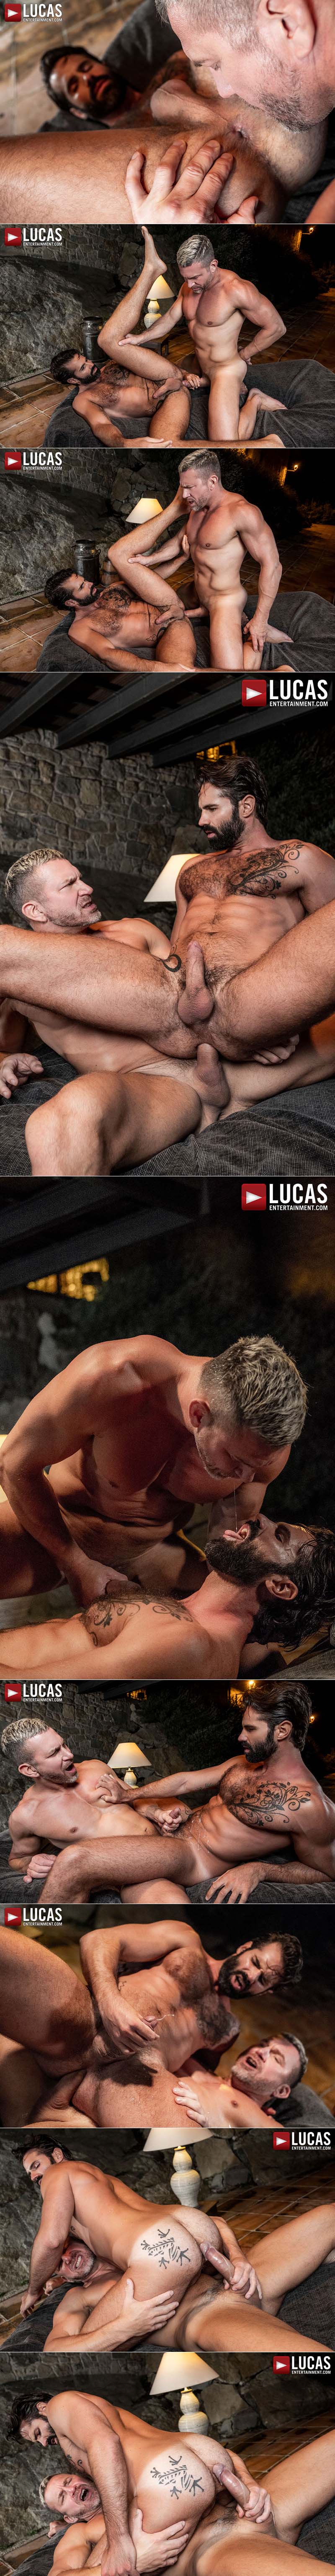 Uncut In The Great Outdoors, Scene Three (Tomas Brand Fucks Dani Robles) at Lucas Entertainment